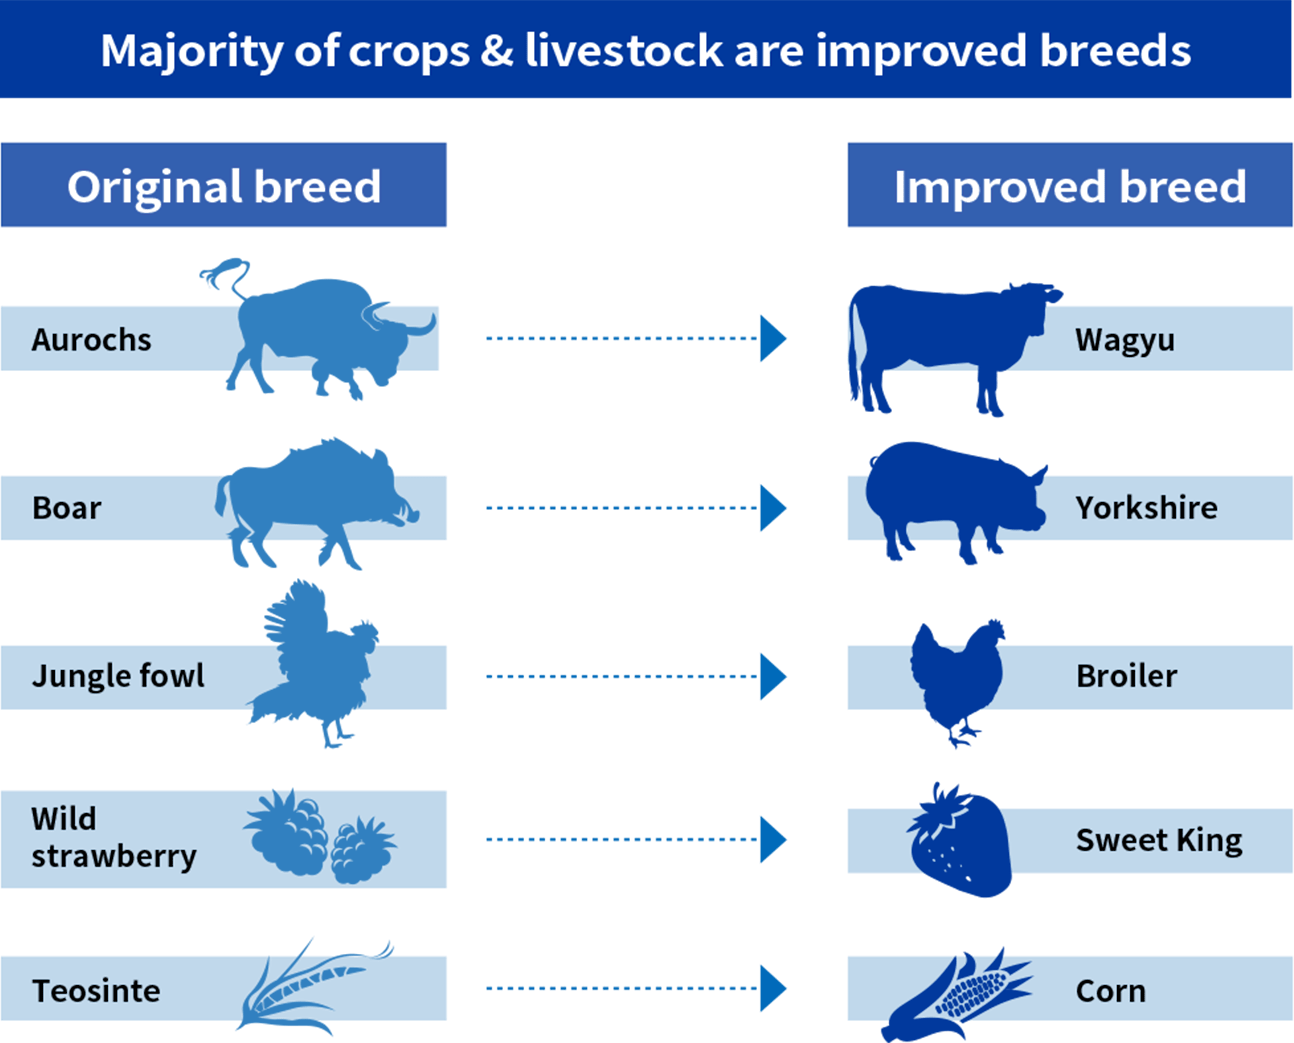 Majority of crops & livestock are improved breeds